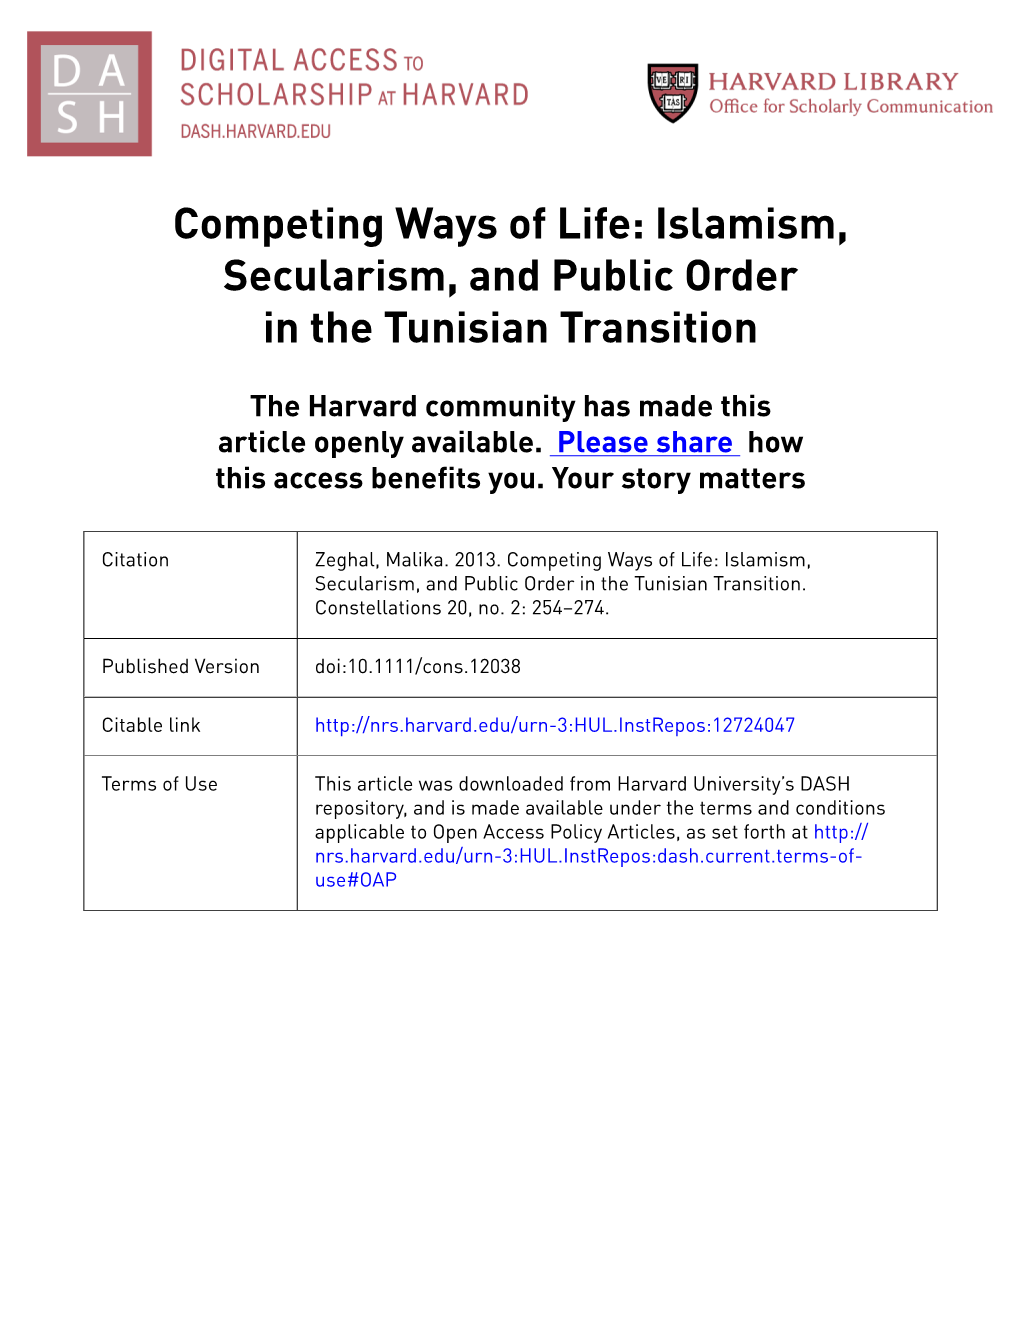 Islamism, Secularism, and Public Order in the Tunisian Transition